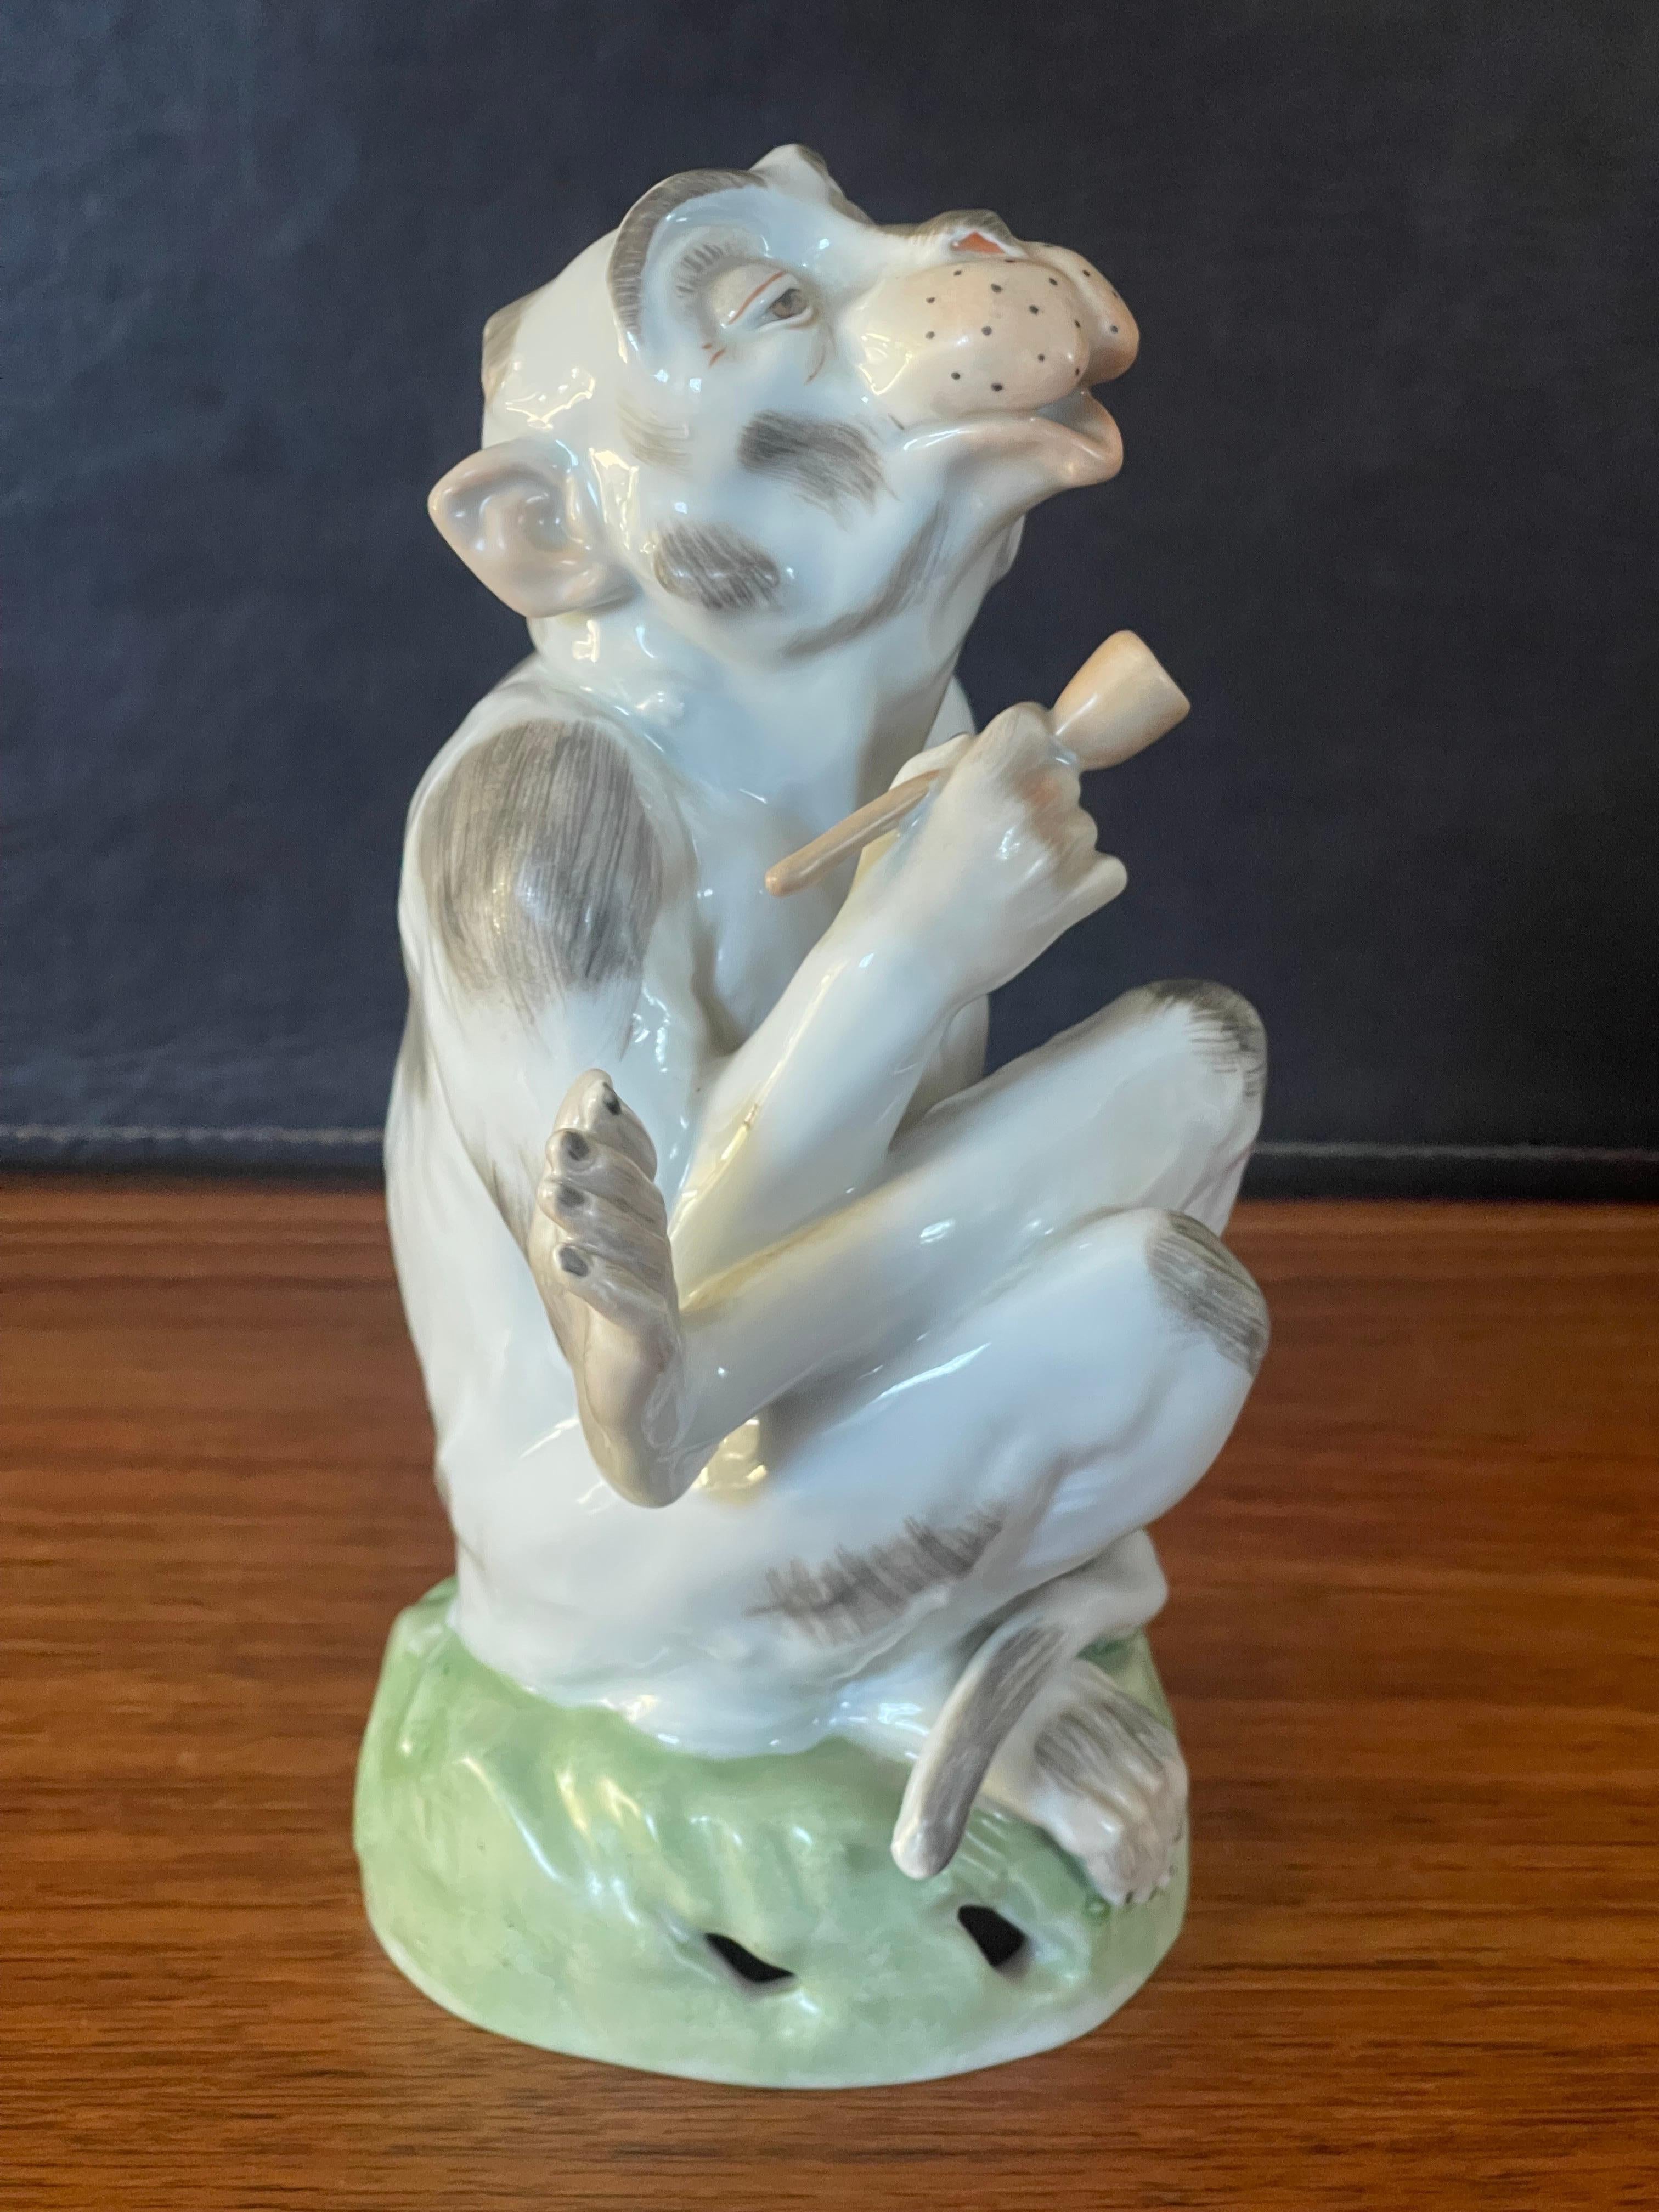 20th Century Porcelain Smoking Monkey with Pipe by Carl Thieme for Dresden